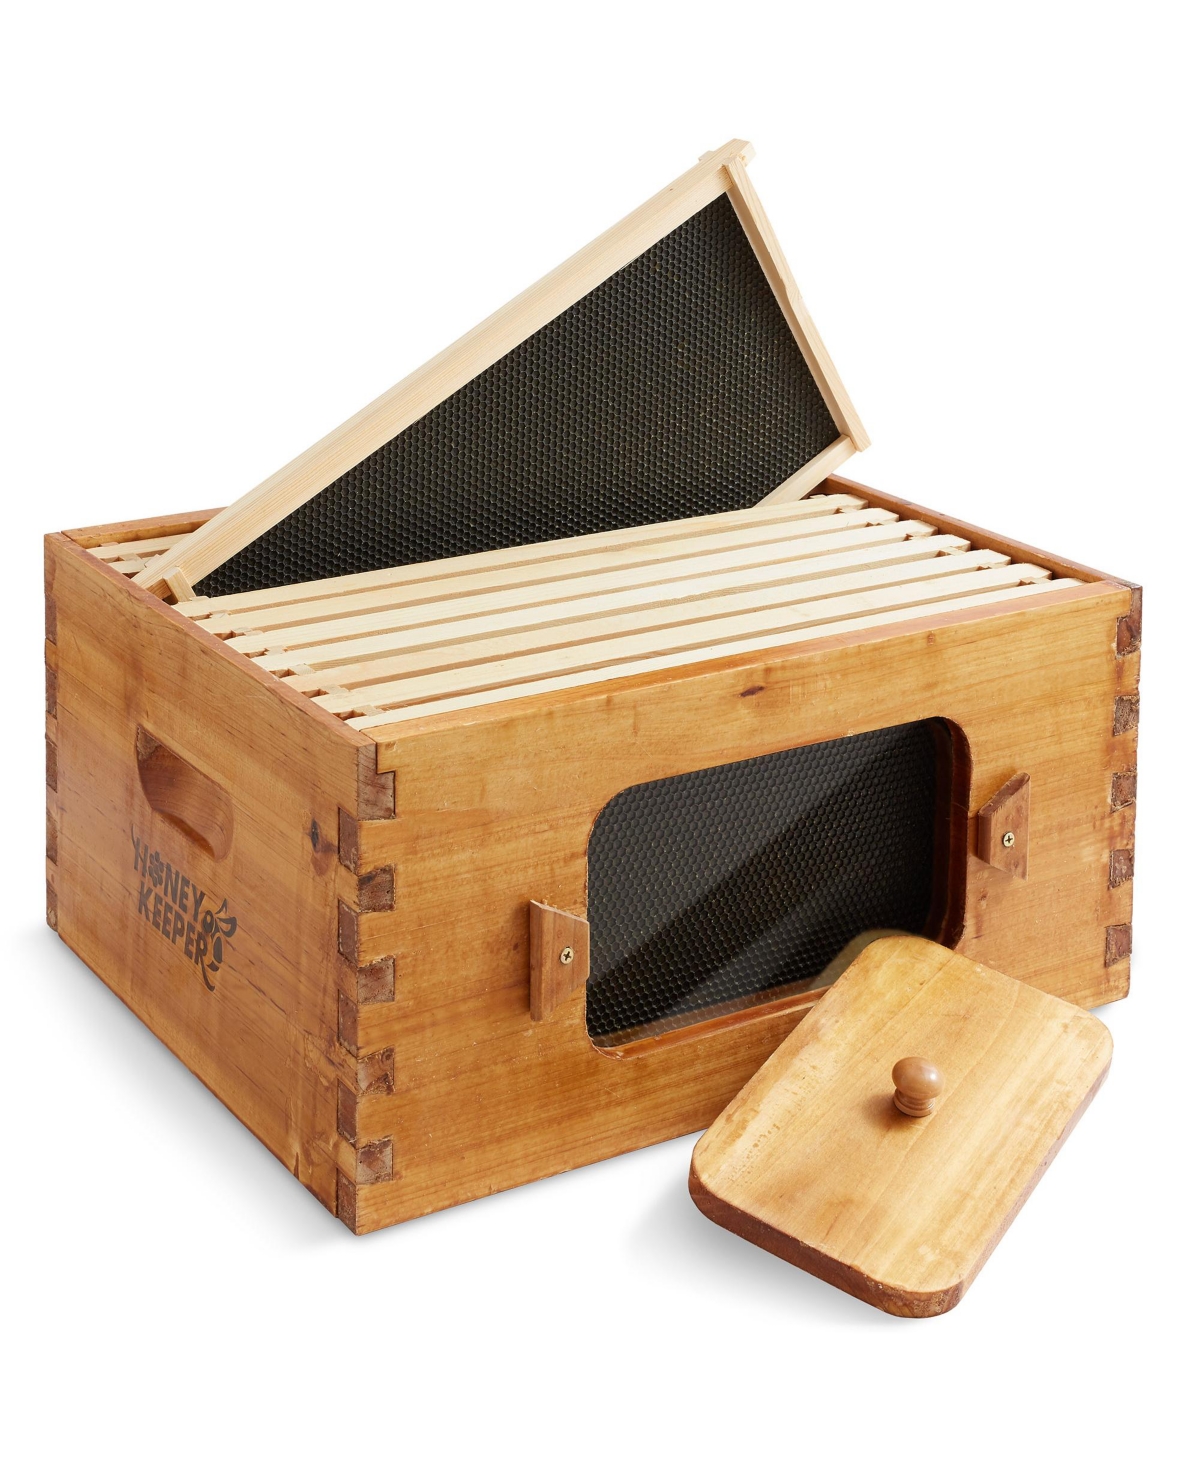 Medium Super Brood Box with Window, 100% Beeswax Coated Beehive Kit with 10 Wooden Frames and Waxed Foundations for Langstroth Beekeeping